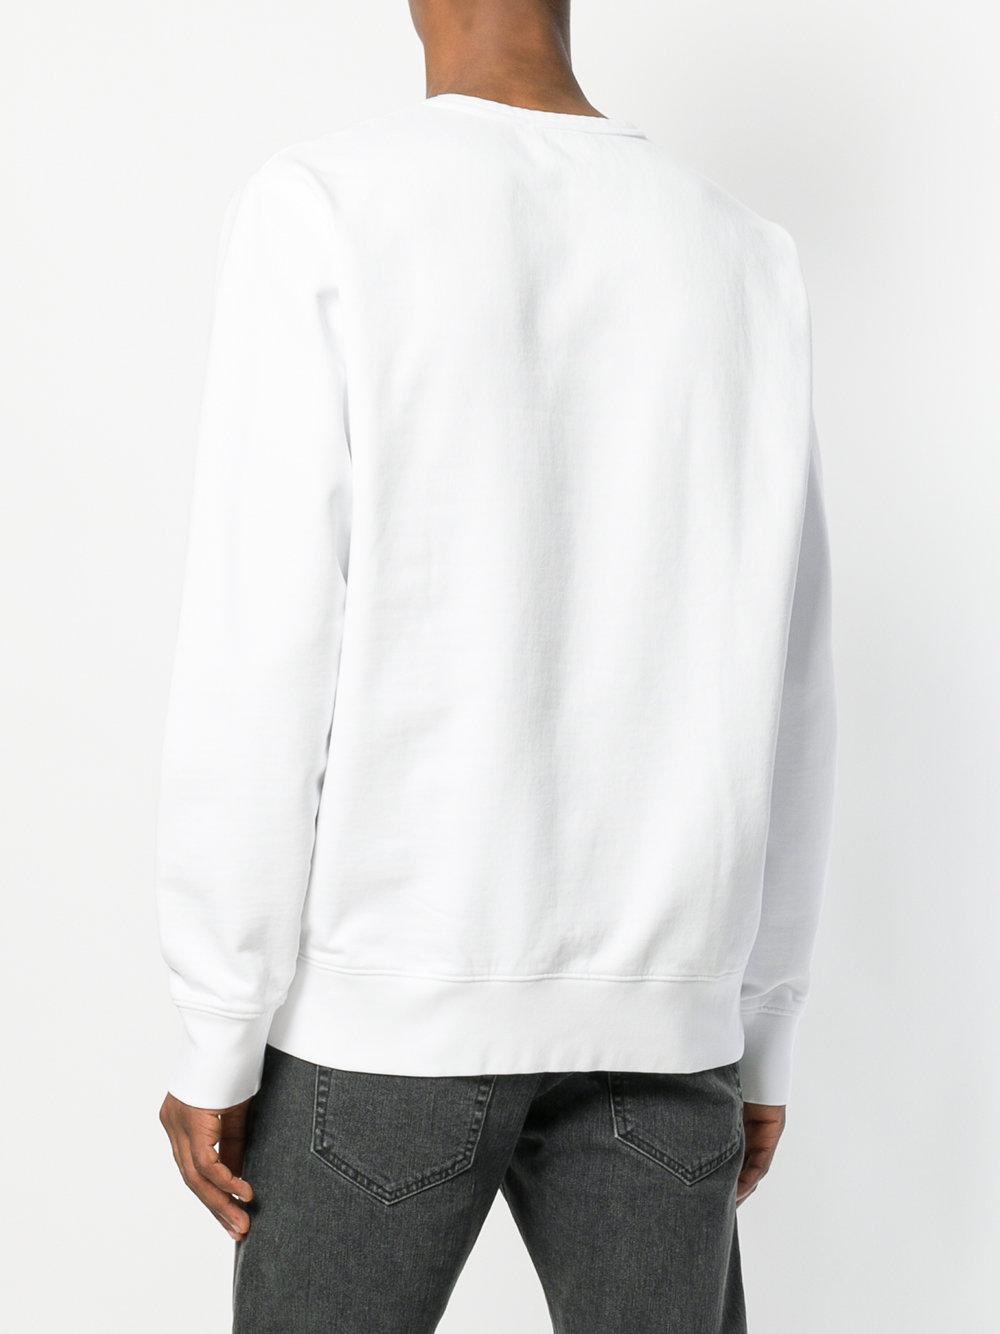 WOOD WOOD Cotton Good Times Sweatshirt in White for Men - Lyst